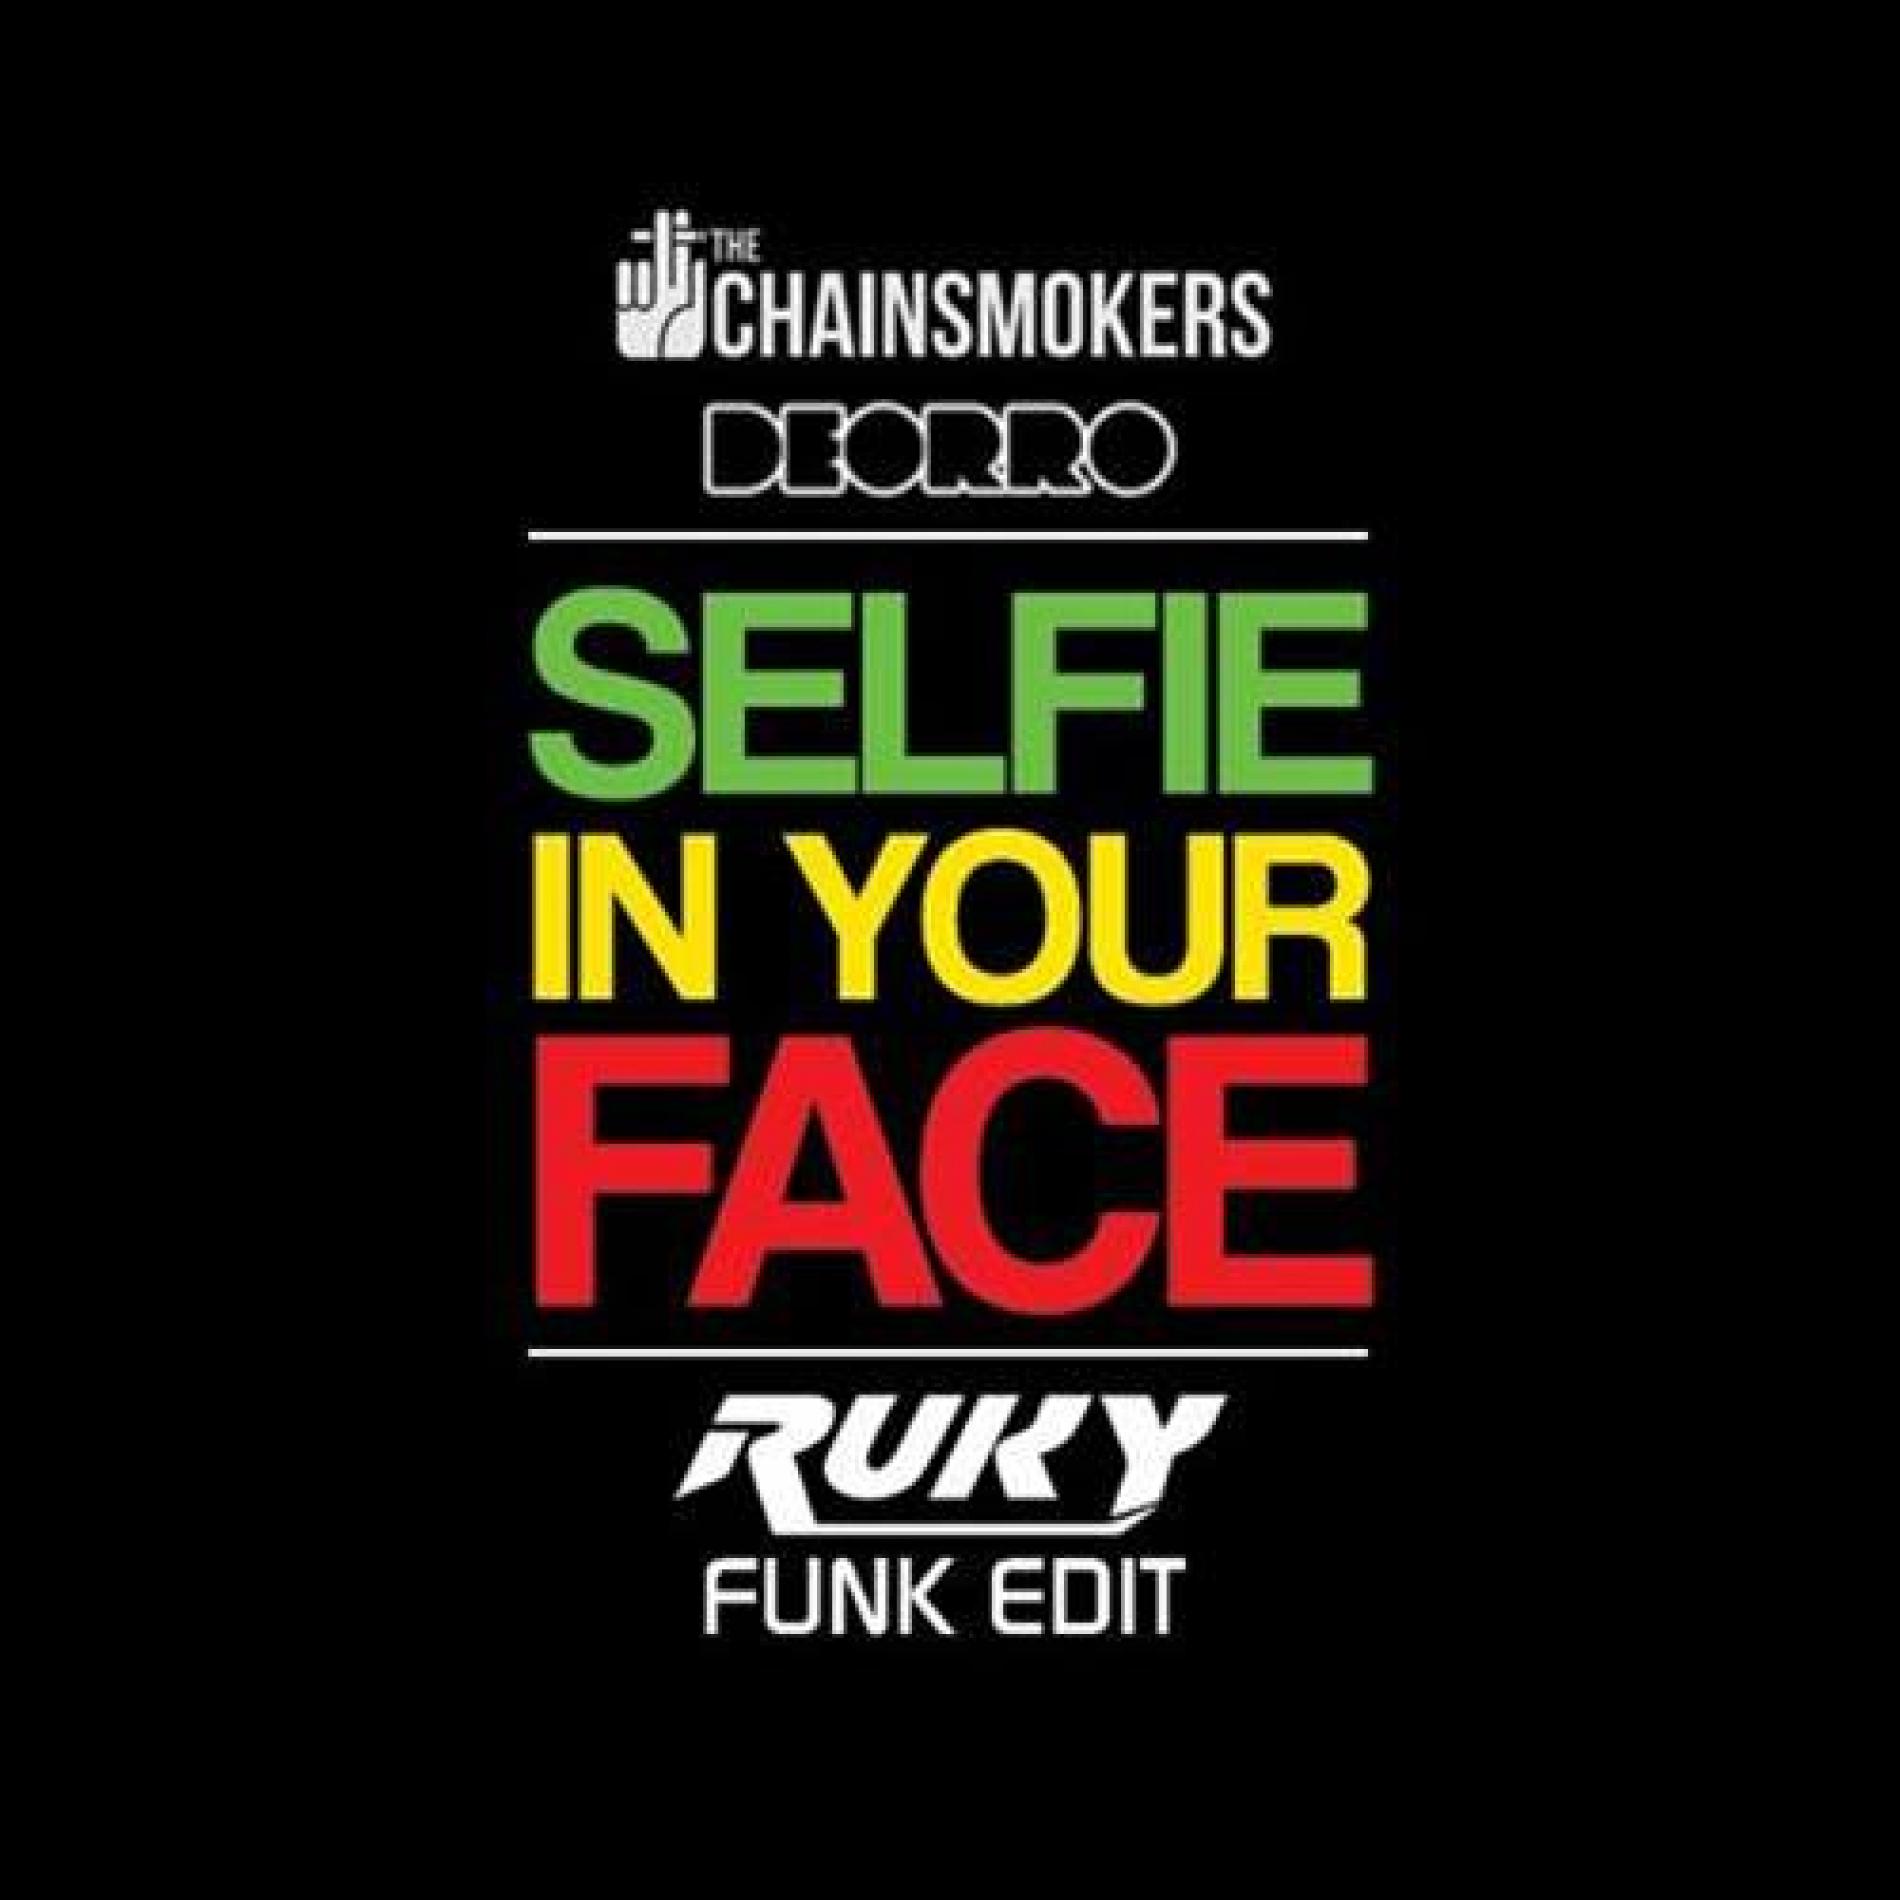 SELFIE IN YOUR FACE (RUKY FUNK EDIT)